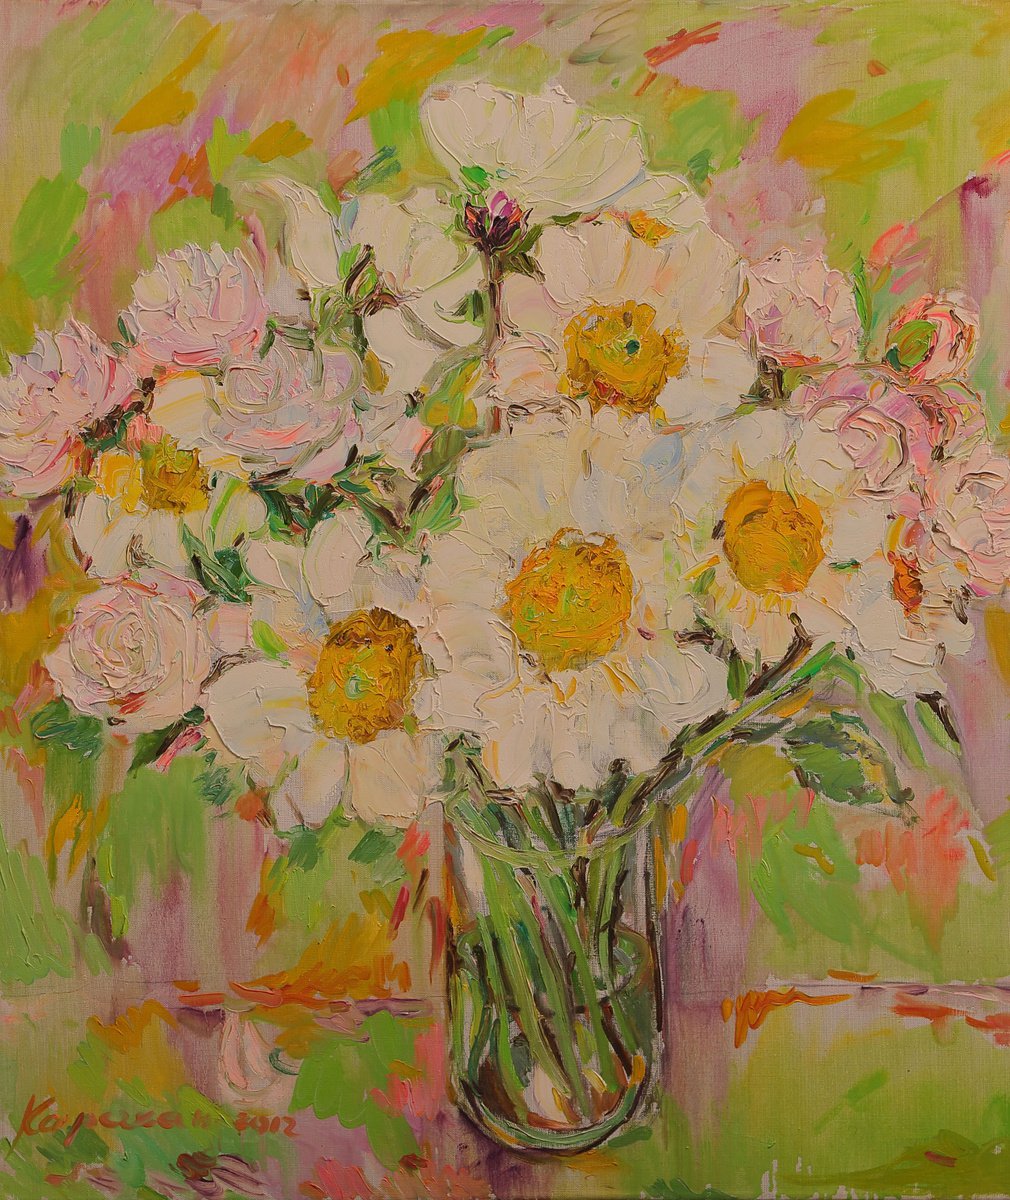 SPRING BOUQUET - Oil Painting - Still Life with Flowers - Peony - Medium Size - Gift 97x77 by Karakhan